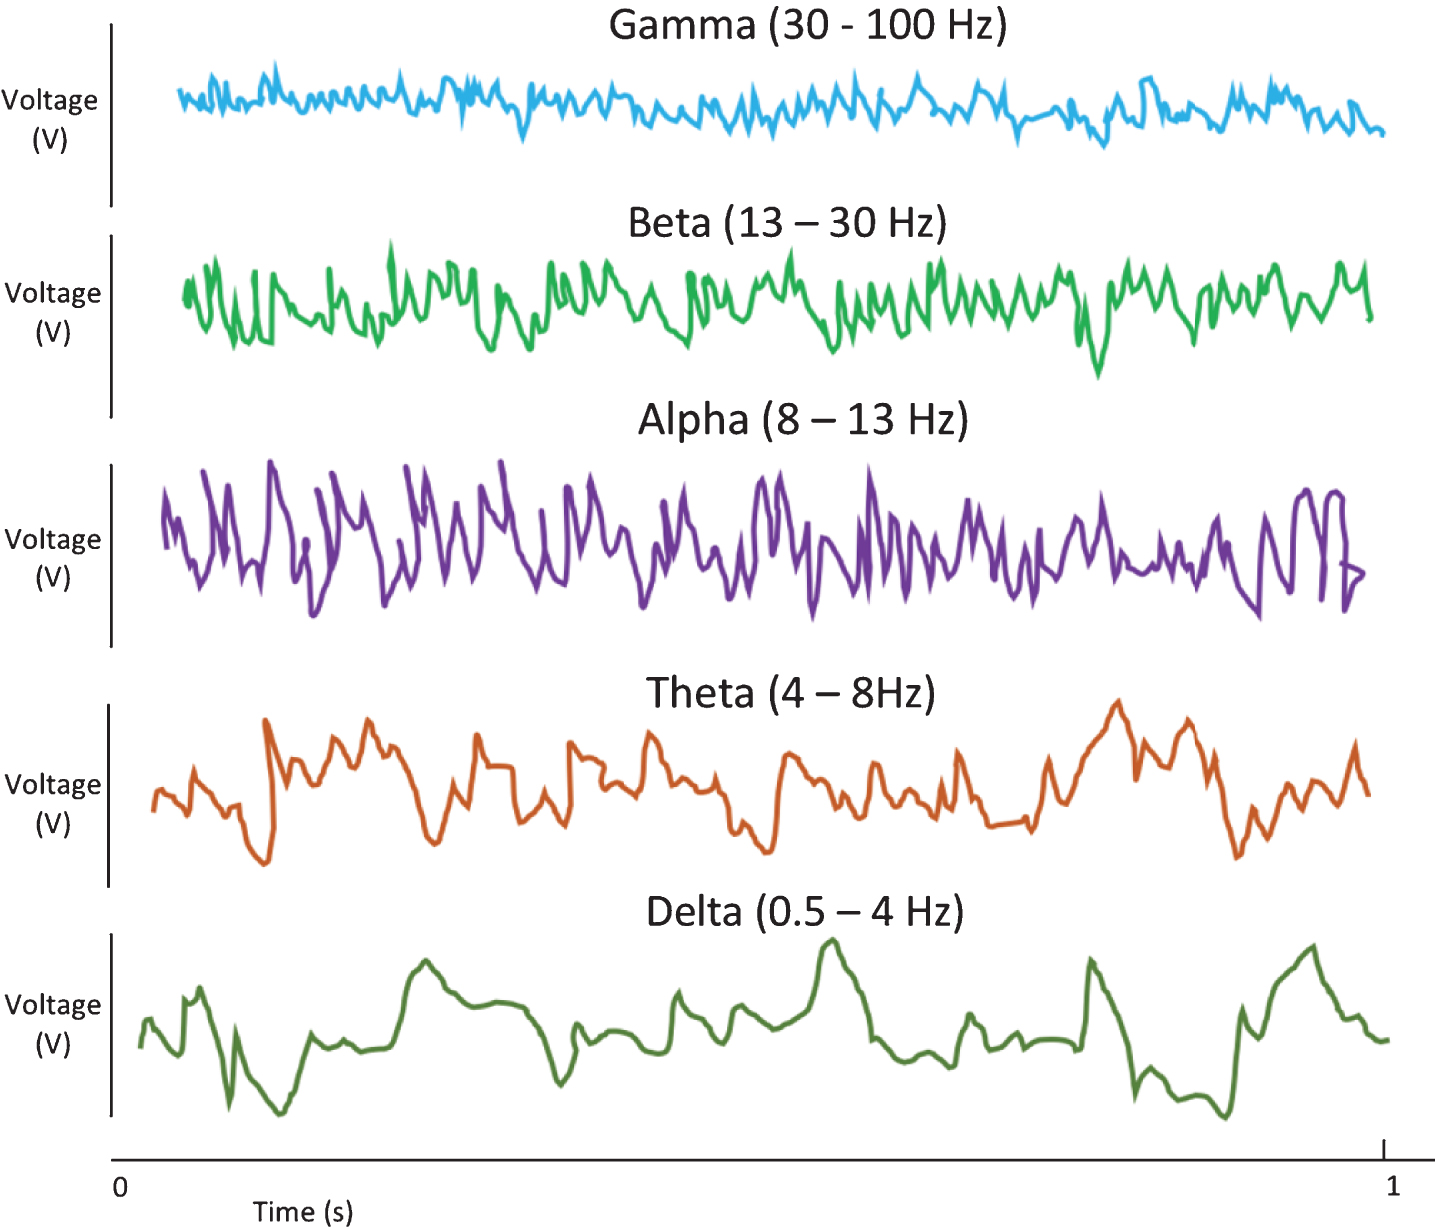 EEG neural oscillatory patterns. These patterns may be divided into groups based on frequency range, with gamma activity being the highest frequency grouping. The frequencies ranges listed are approximate [18, 35].